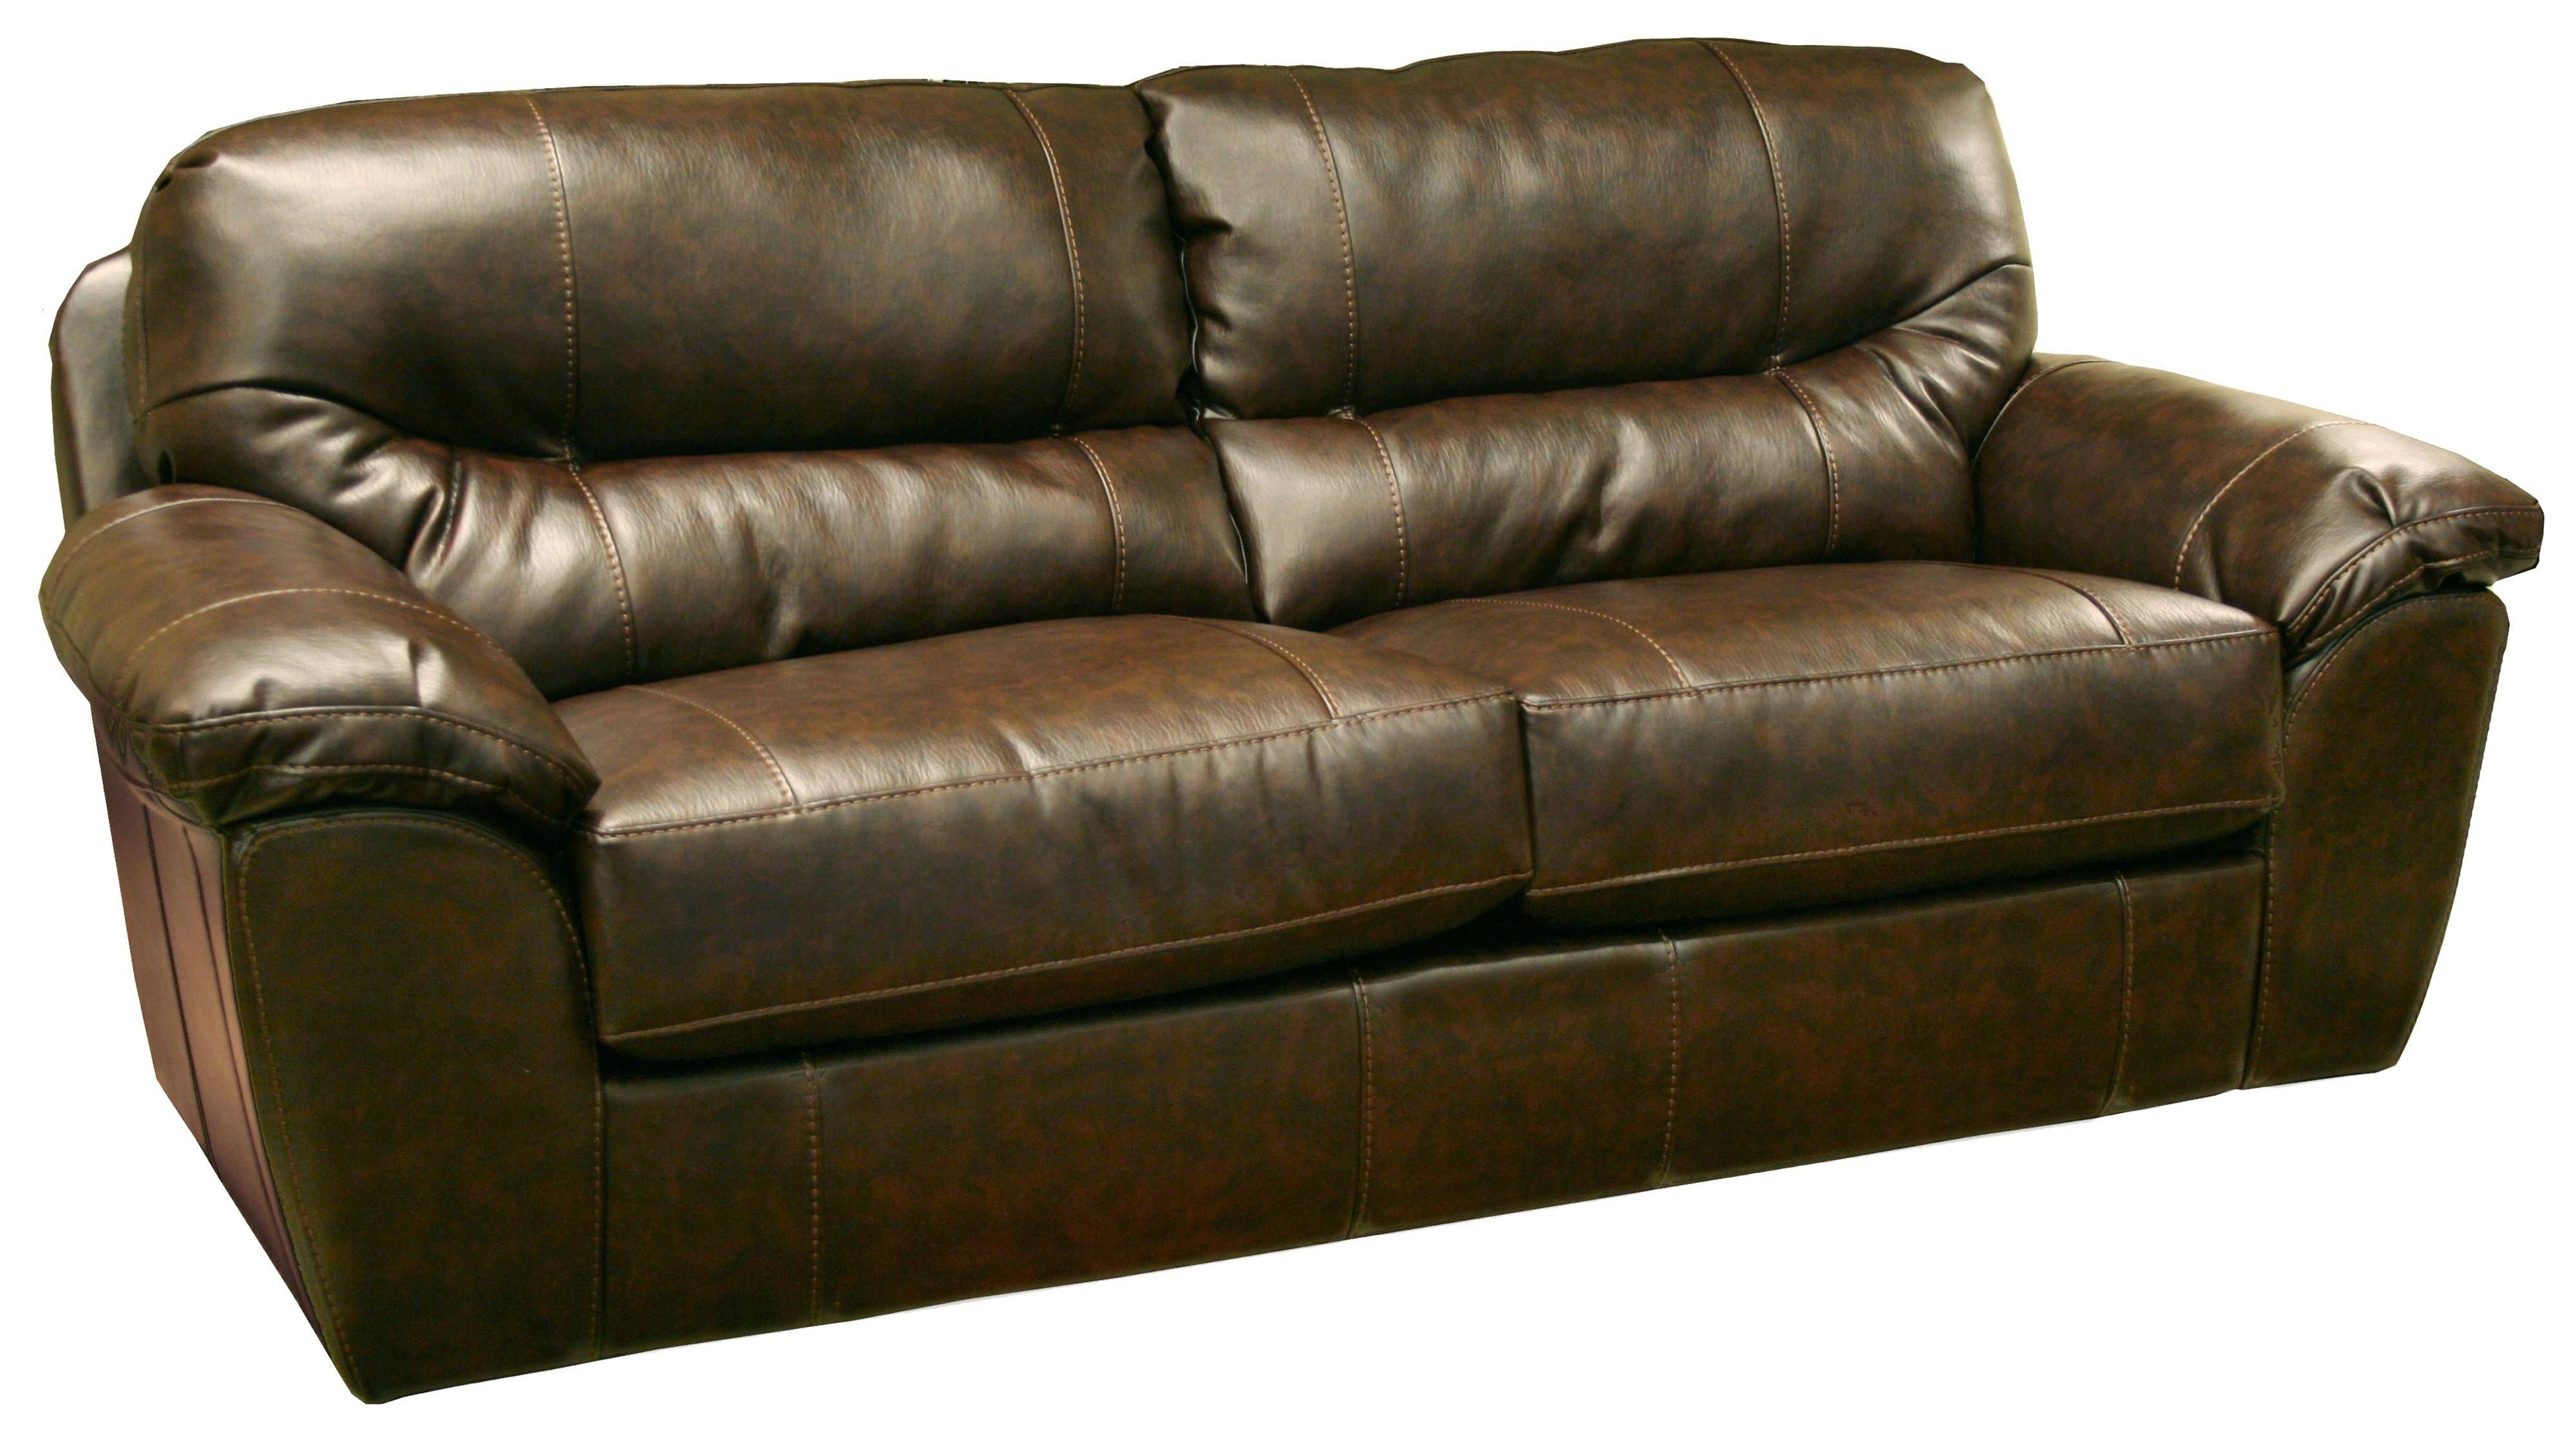 Faux Leather Casual And Comfortable Family Room Sofa Sleeper Throughout Faux Leather Sleeper Sofas (View 15 of 15)